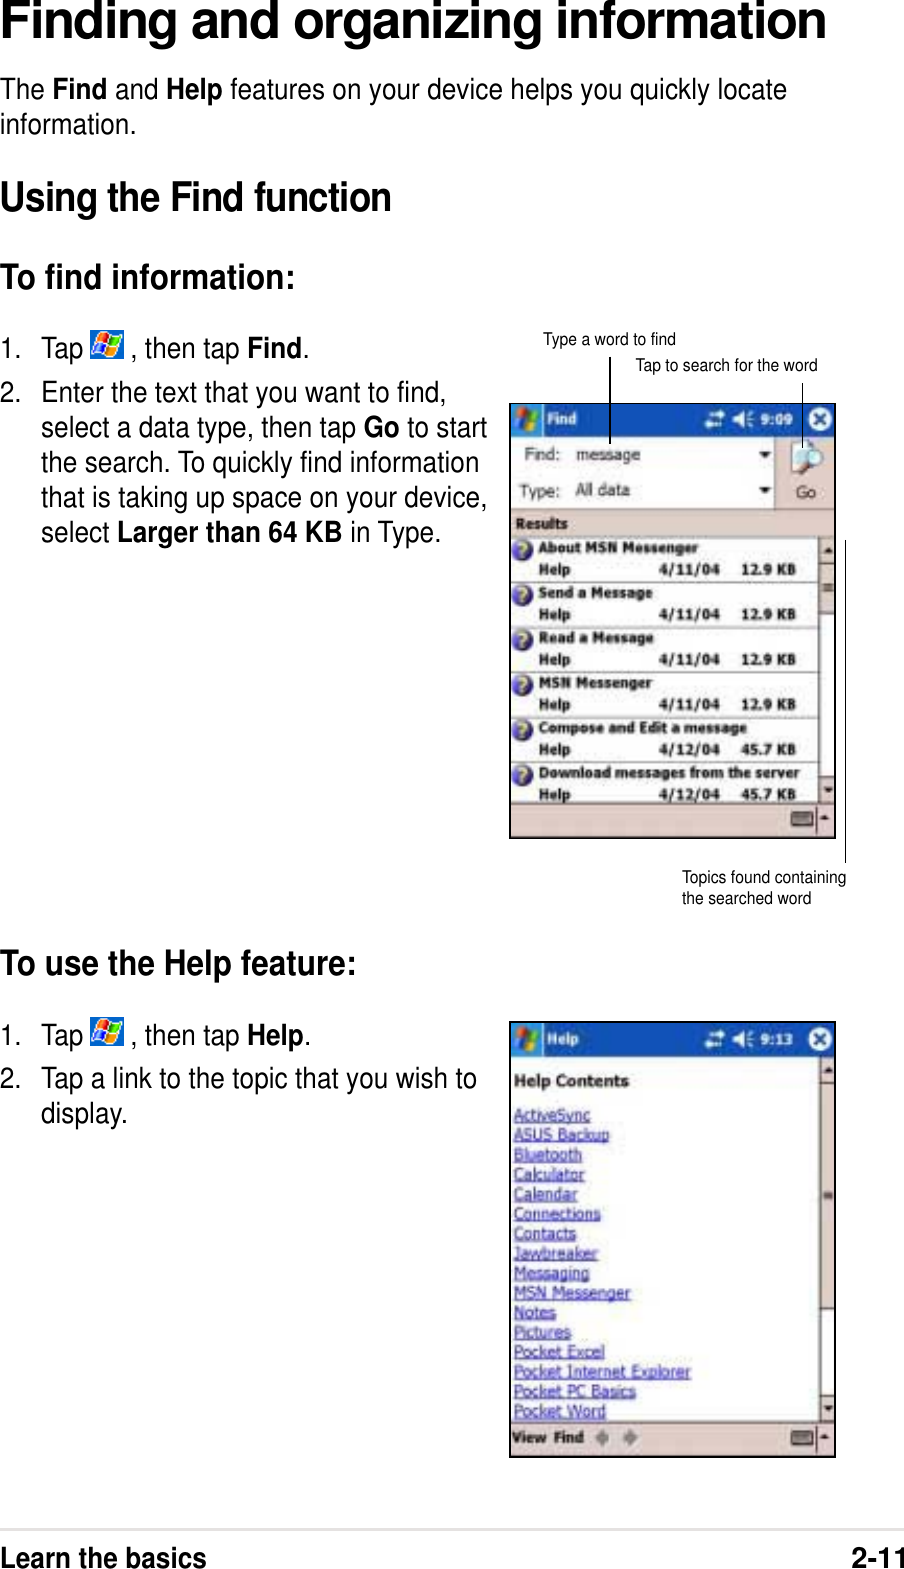 Learn the basics2-11Finding and organizing informationThe Find and Help features on your device helps you quickly locateinformation.Using the Find functionTo find information:1. Tap   , then tap Find.2. Enter the text that you want to find,select a data type, then tap Go to startthe search. To quickly find informationthat is taking up space on your device,select Larger than 64 KB in Type.To use the Help feature:1. Tap   , then tap Help.2. Tap a link to the topic that you wish todisplay.Type a word to findTap to search for the wordTopics found containingthe searched word